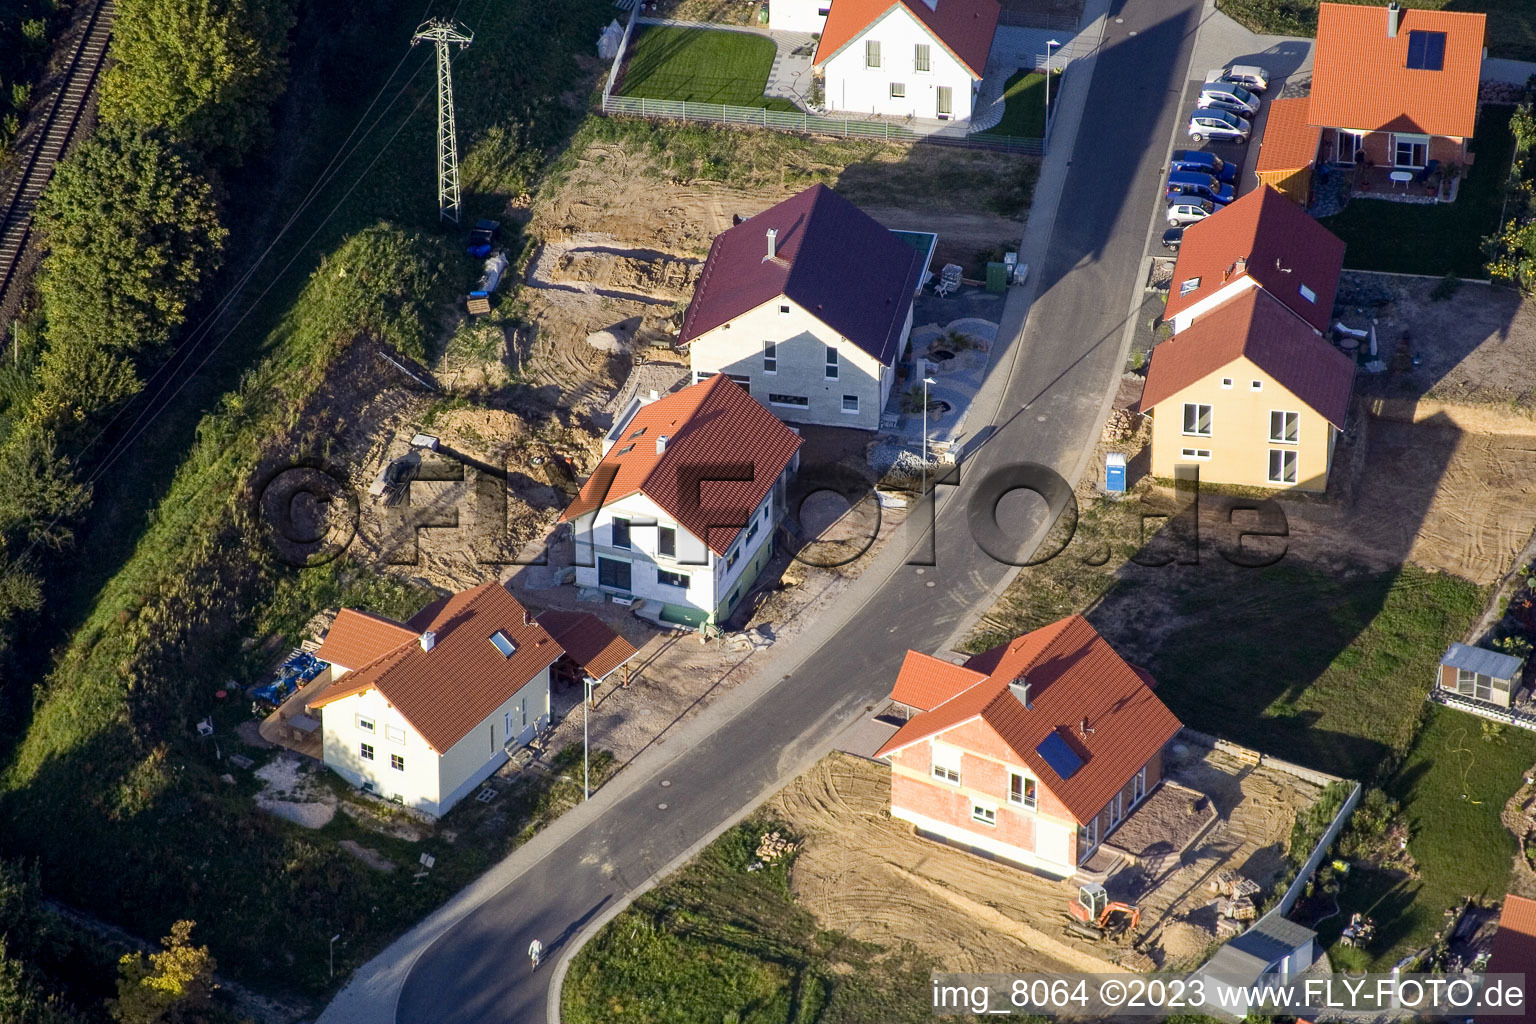 Aerial photograpy of New development area in the district Schaidt in Wörth am Rhein in the state Rhineland-Palatinate, Germany